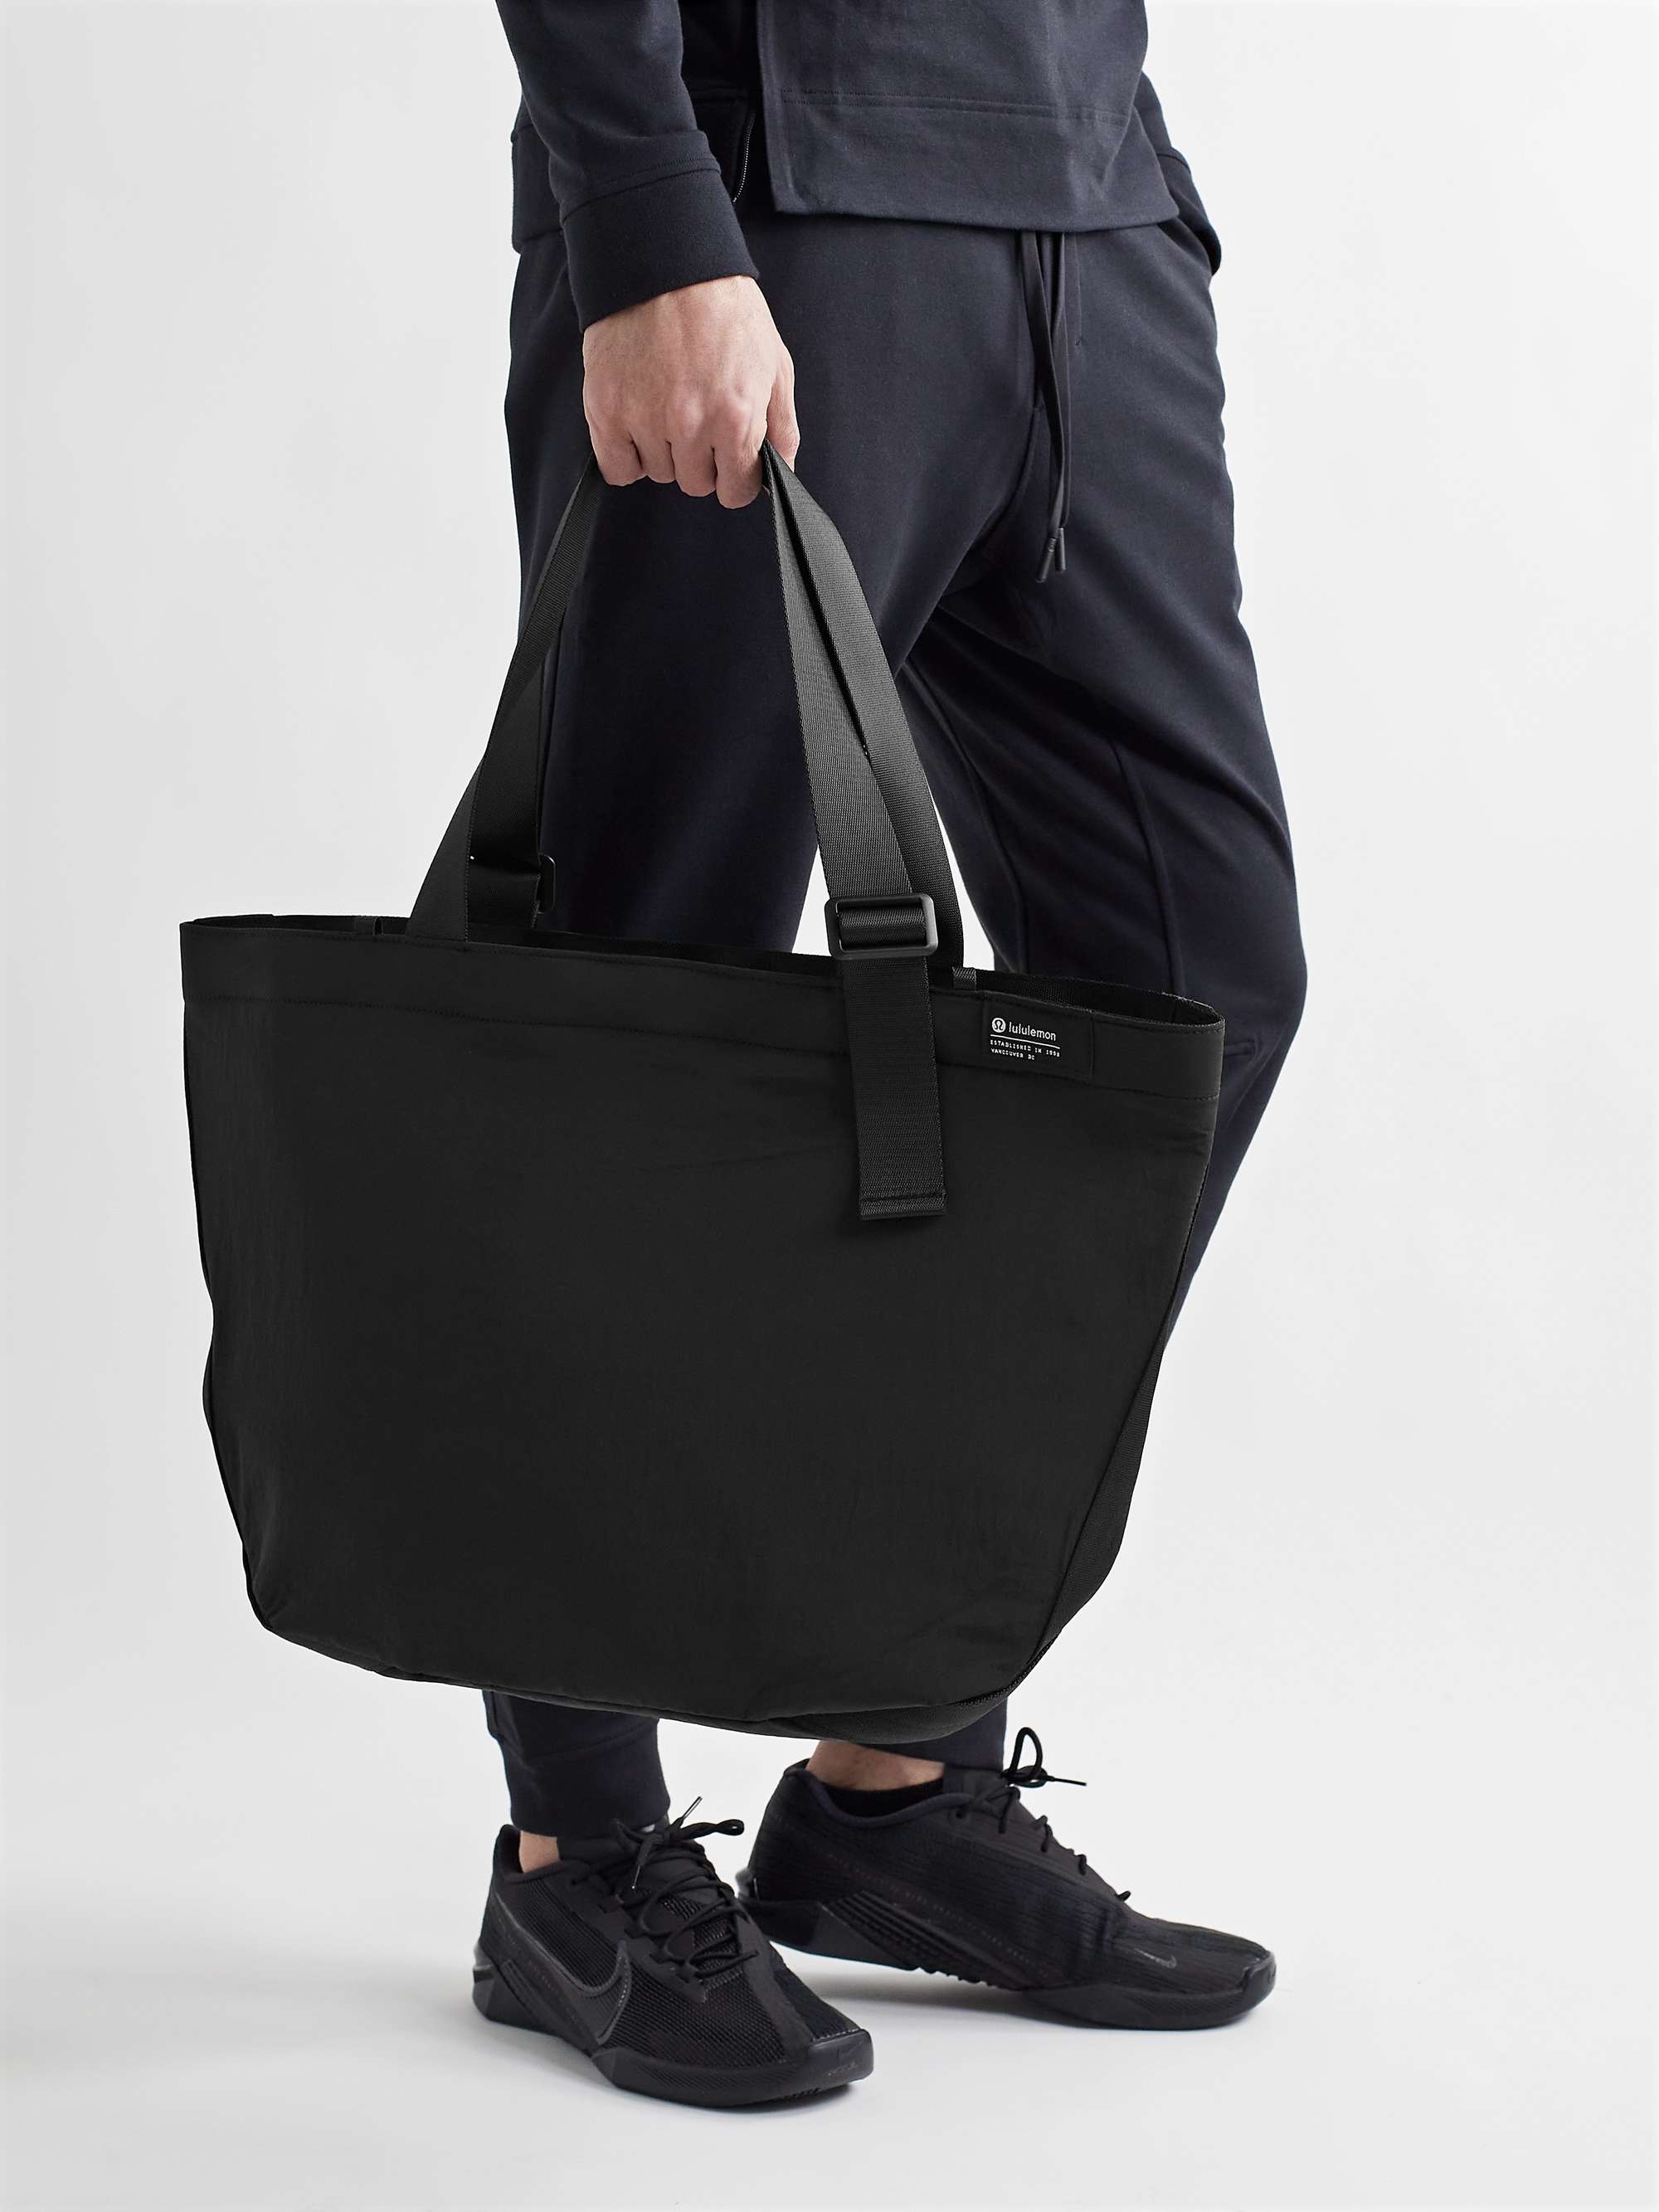 LULULEMON Clean Lines Recycled Nylon Tote